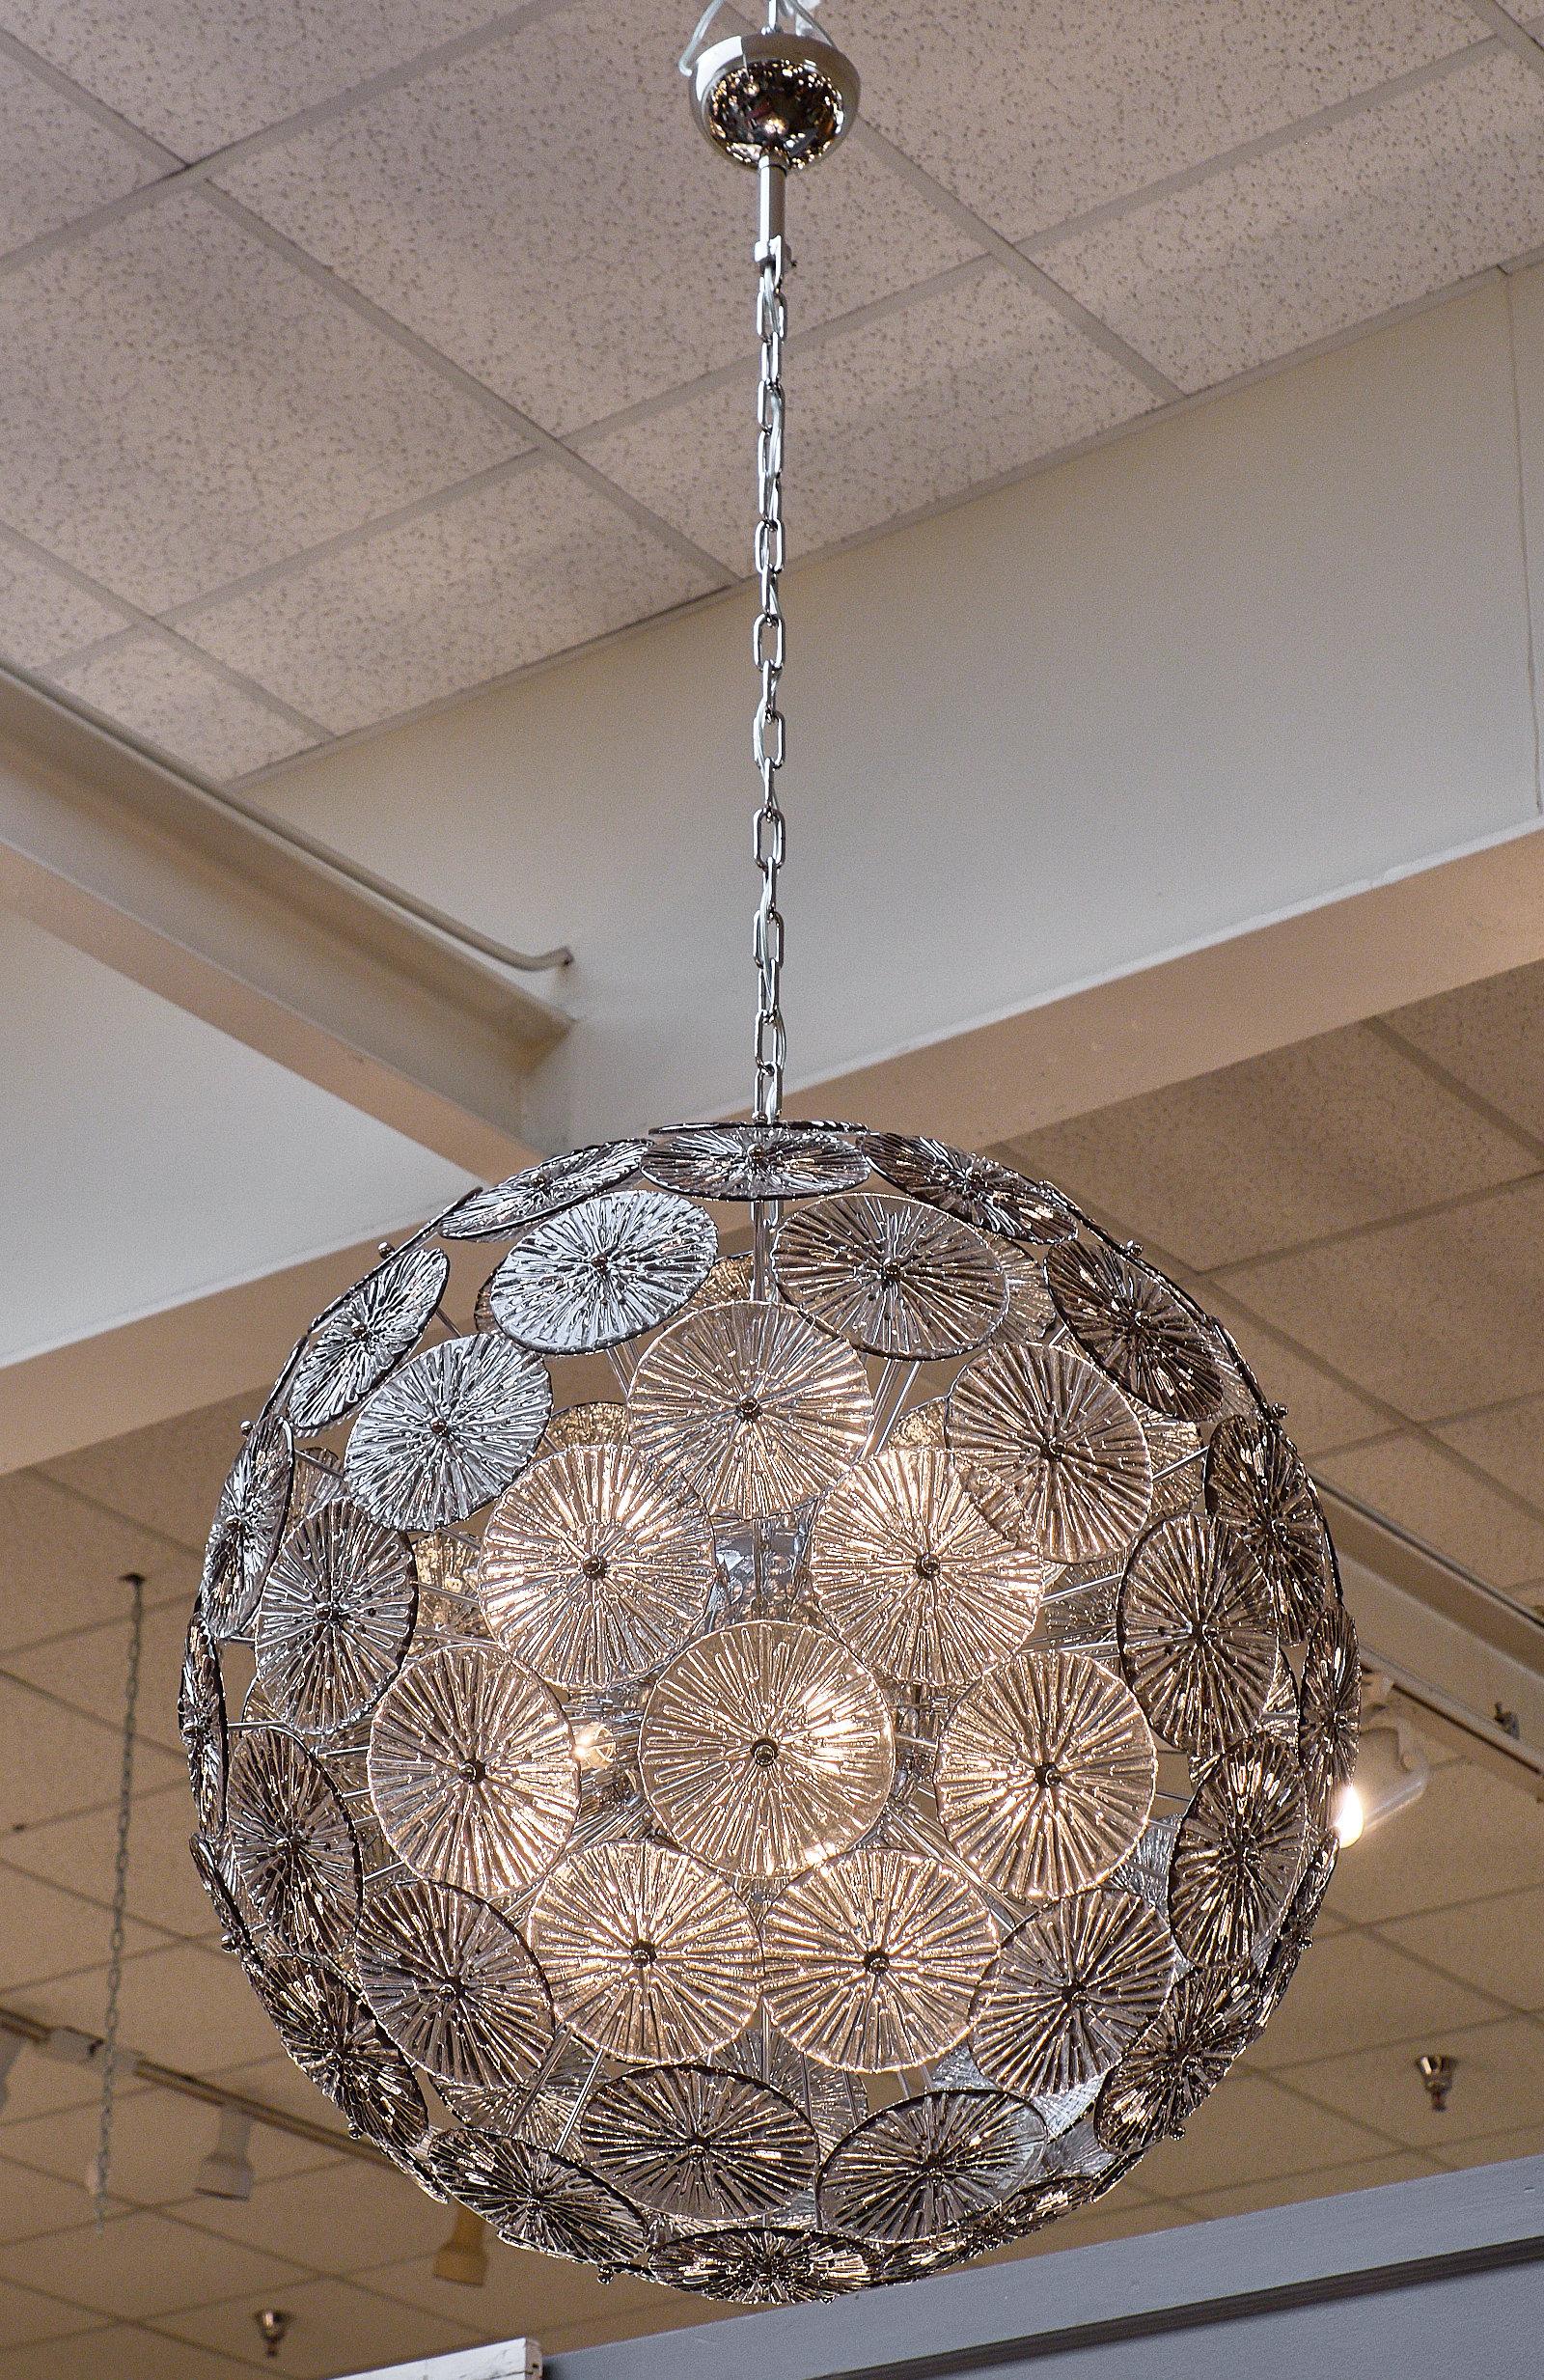 An Italian smoked Murano glass Sputnik chandelier. This fixture has multiple smoked glass circular elements, each handblown using the “stampato” technique. We couldn’t resist the soft glow and the feel of strong elegance and refinement. This